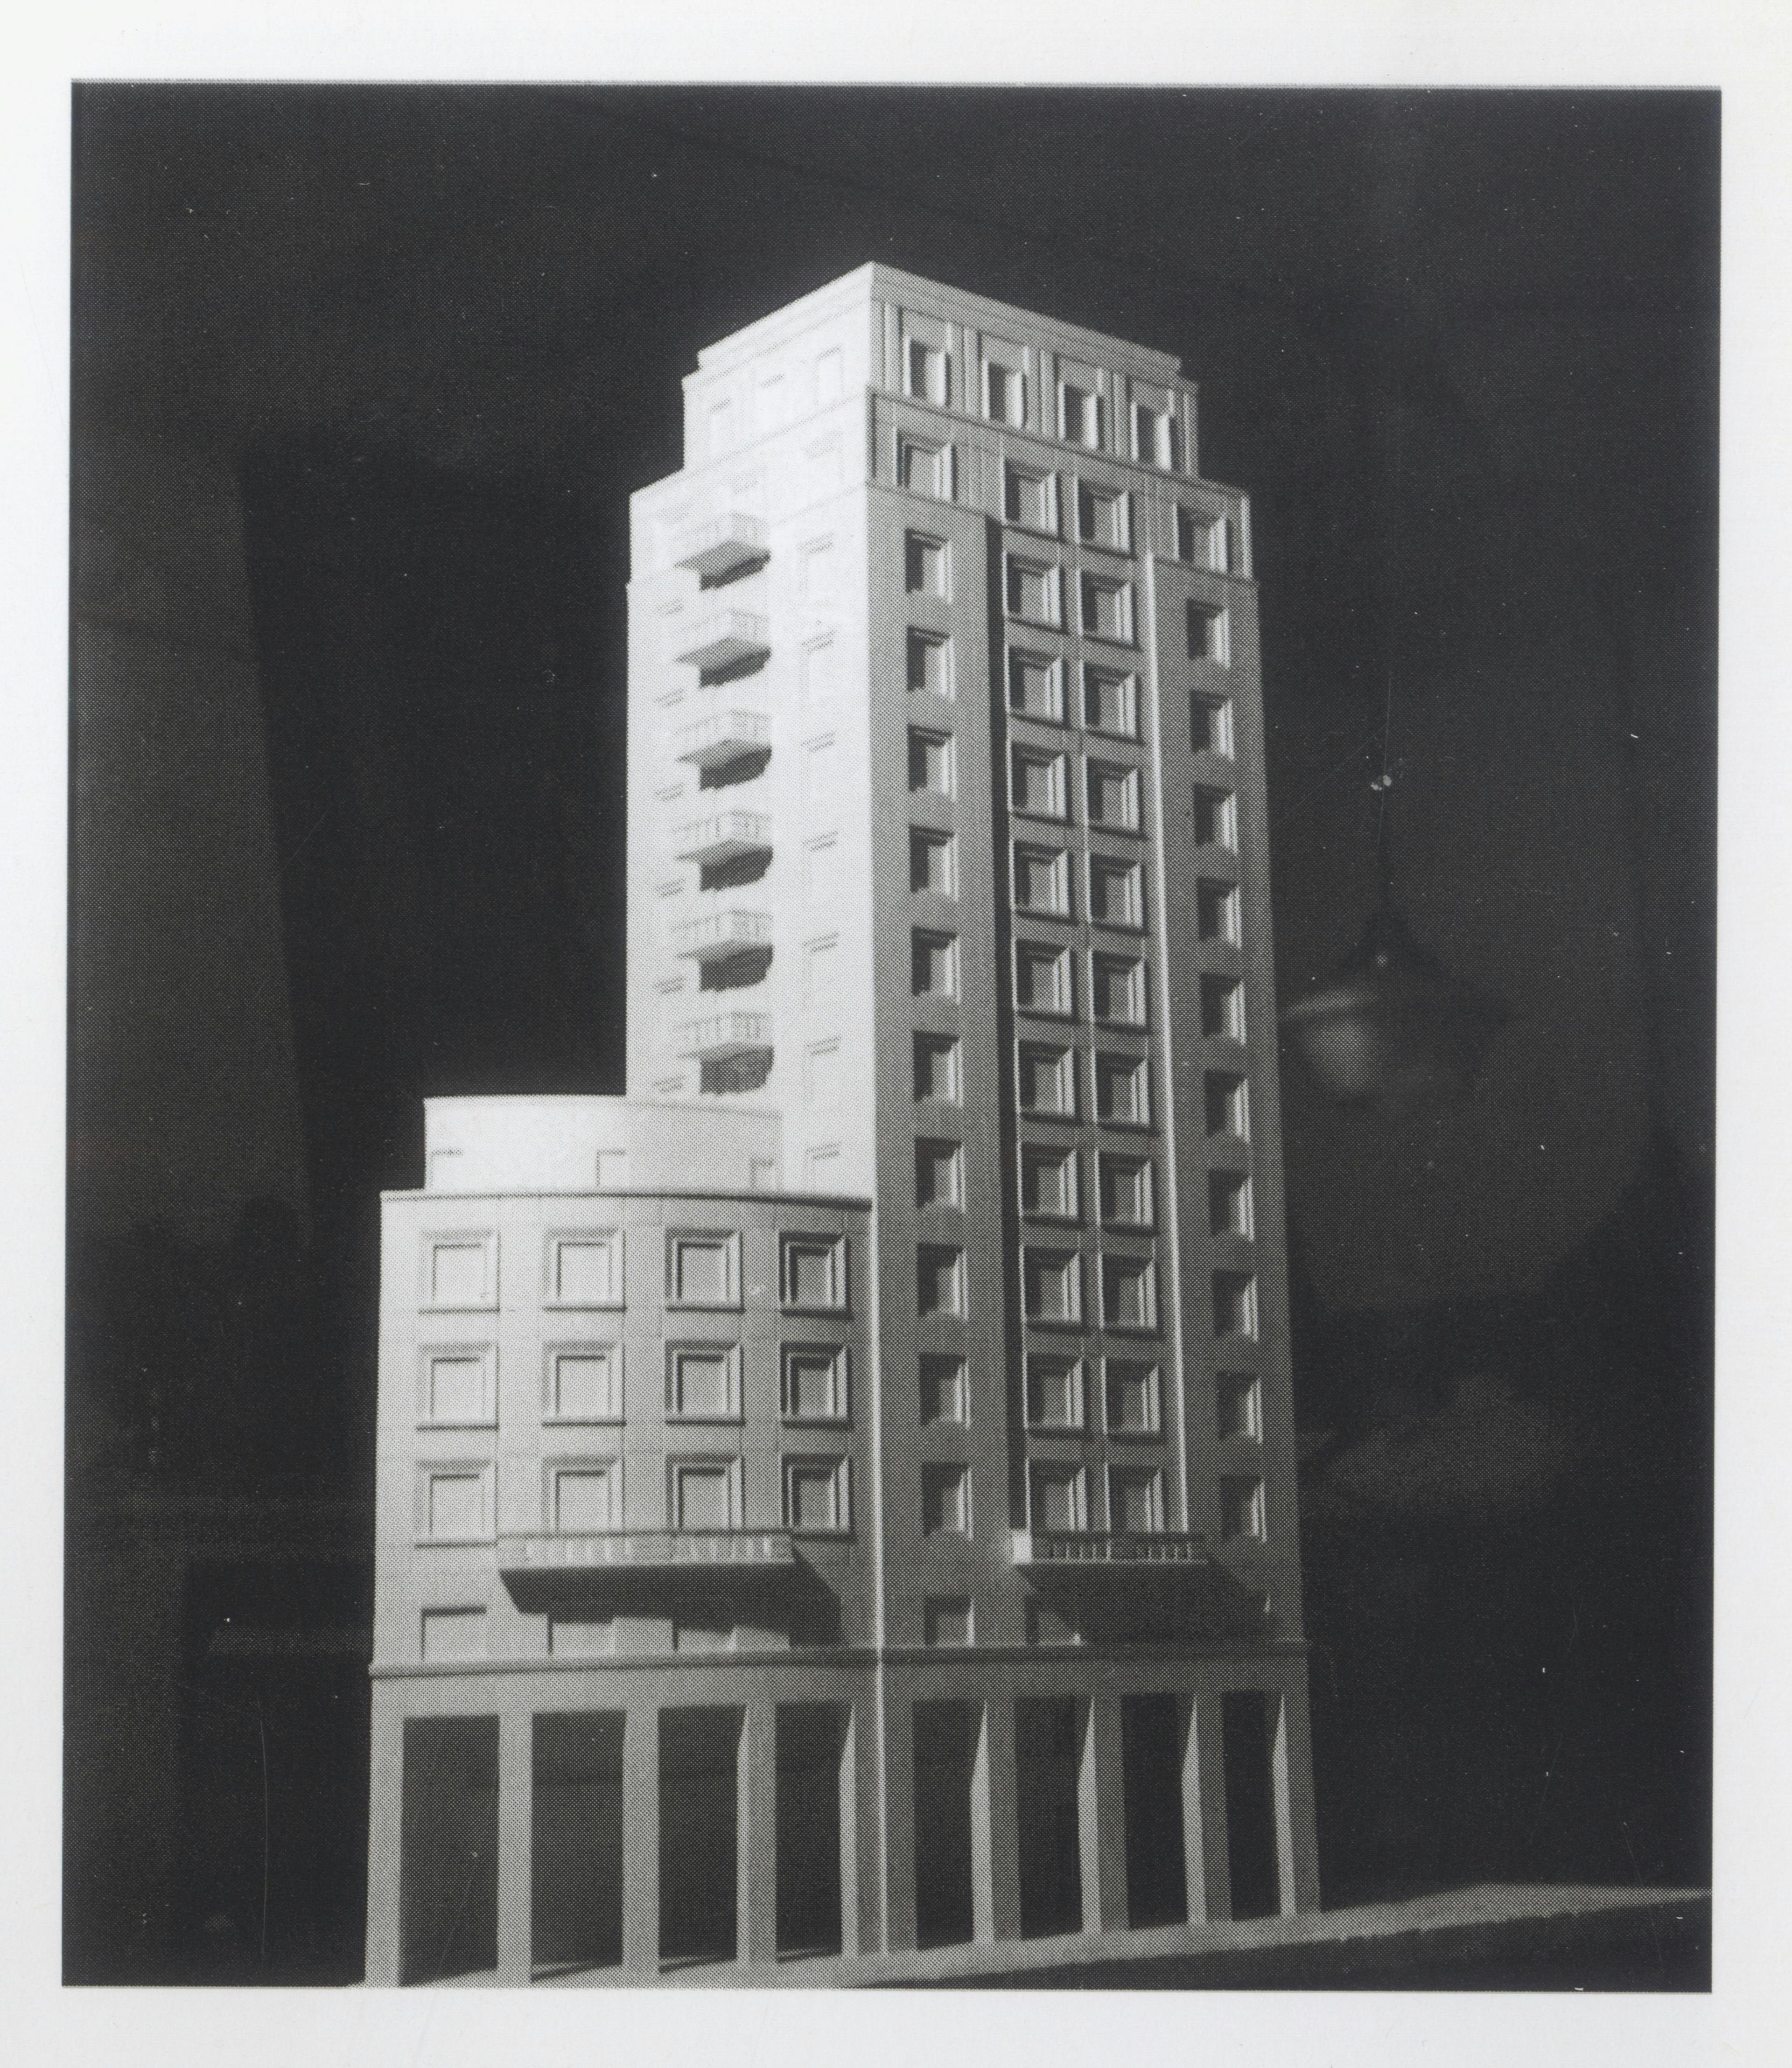 Model of the Snia Viscosa tower house taken from the studio of the architect Alessandro Rimini